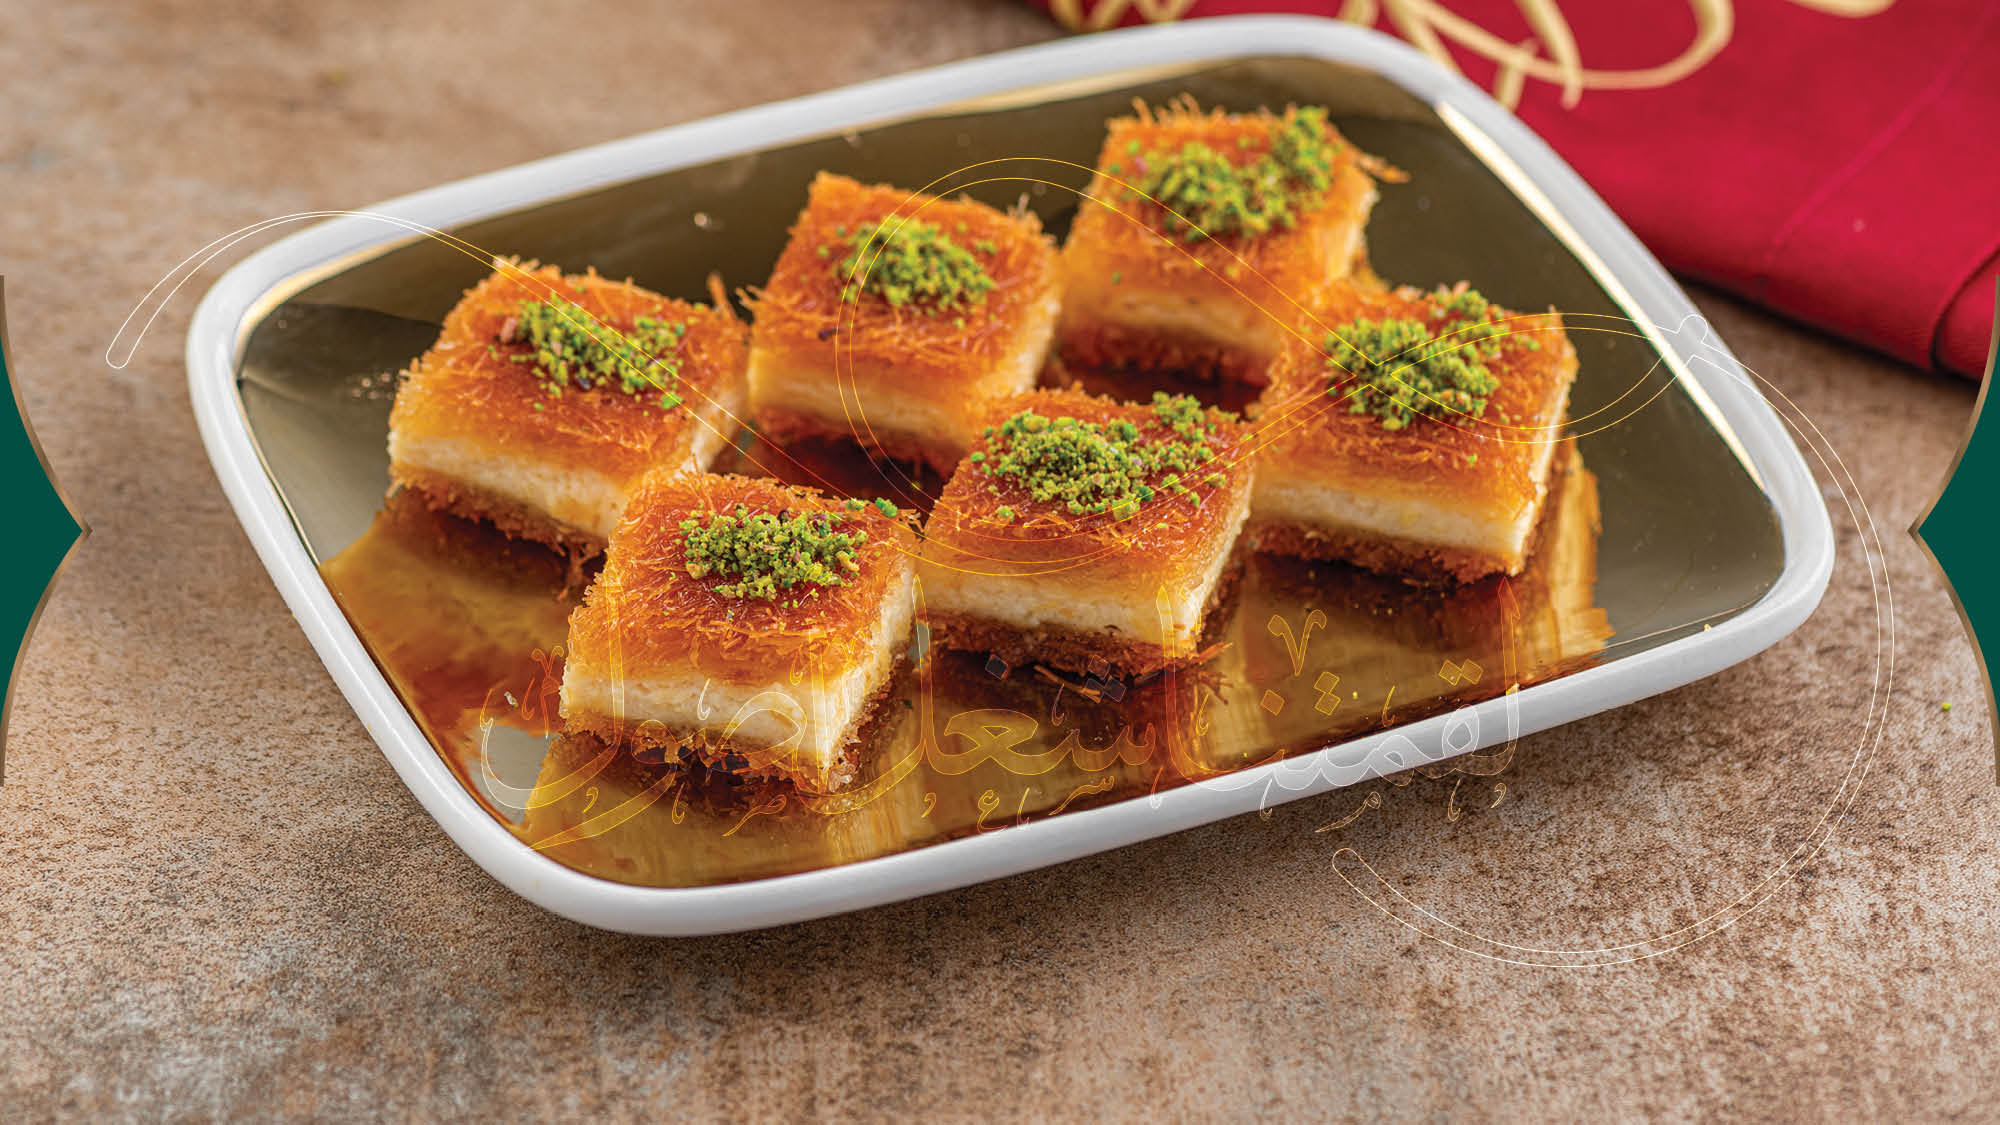 The Popularity of Arabic Sweets in the UAE